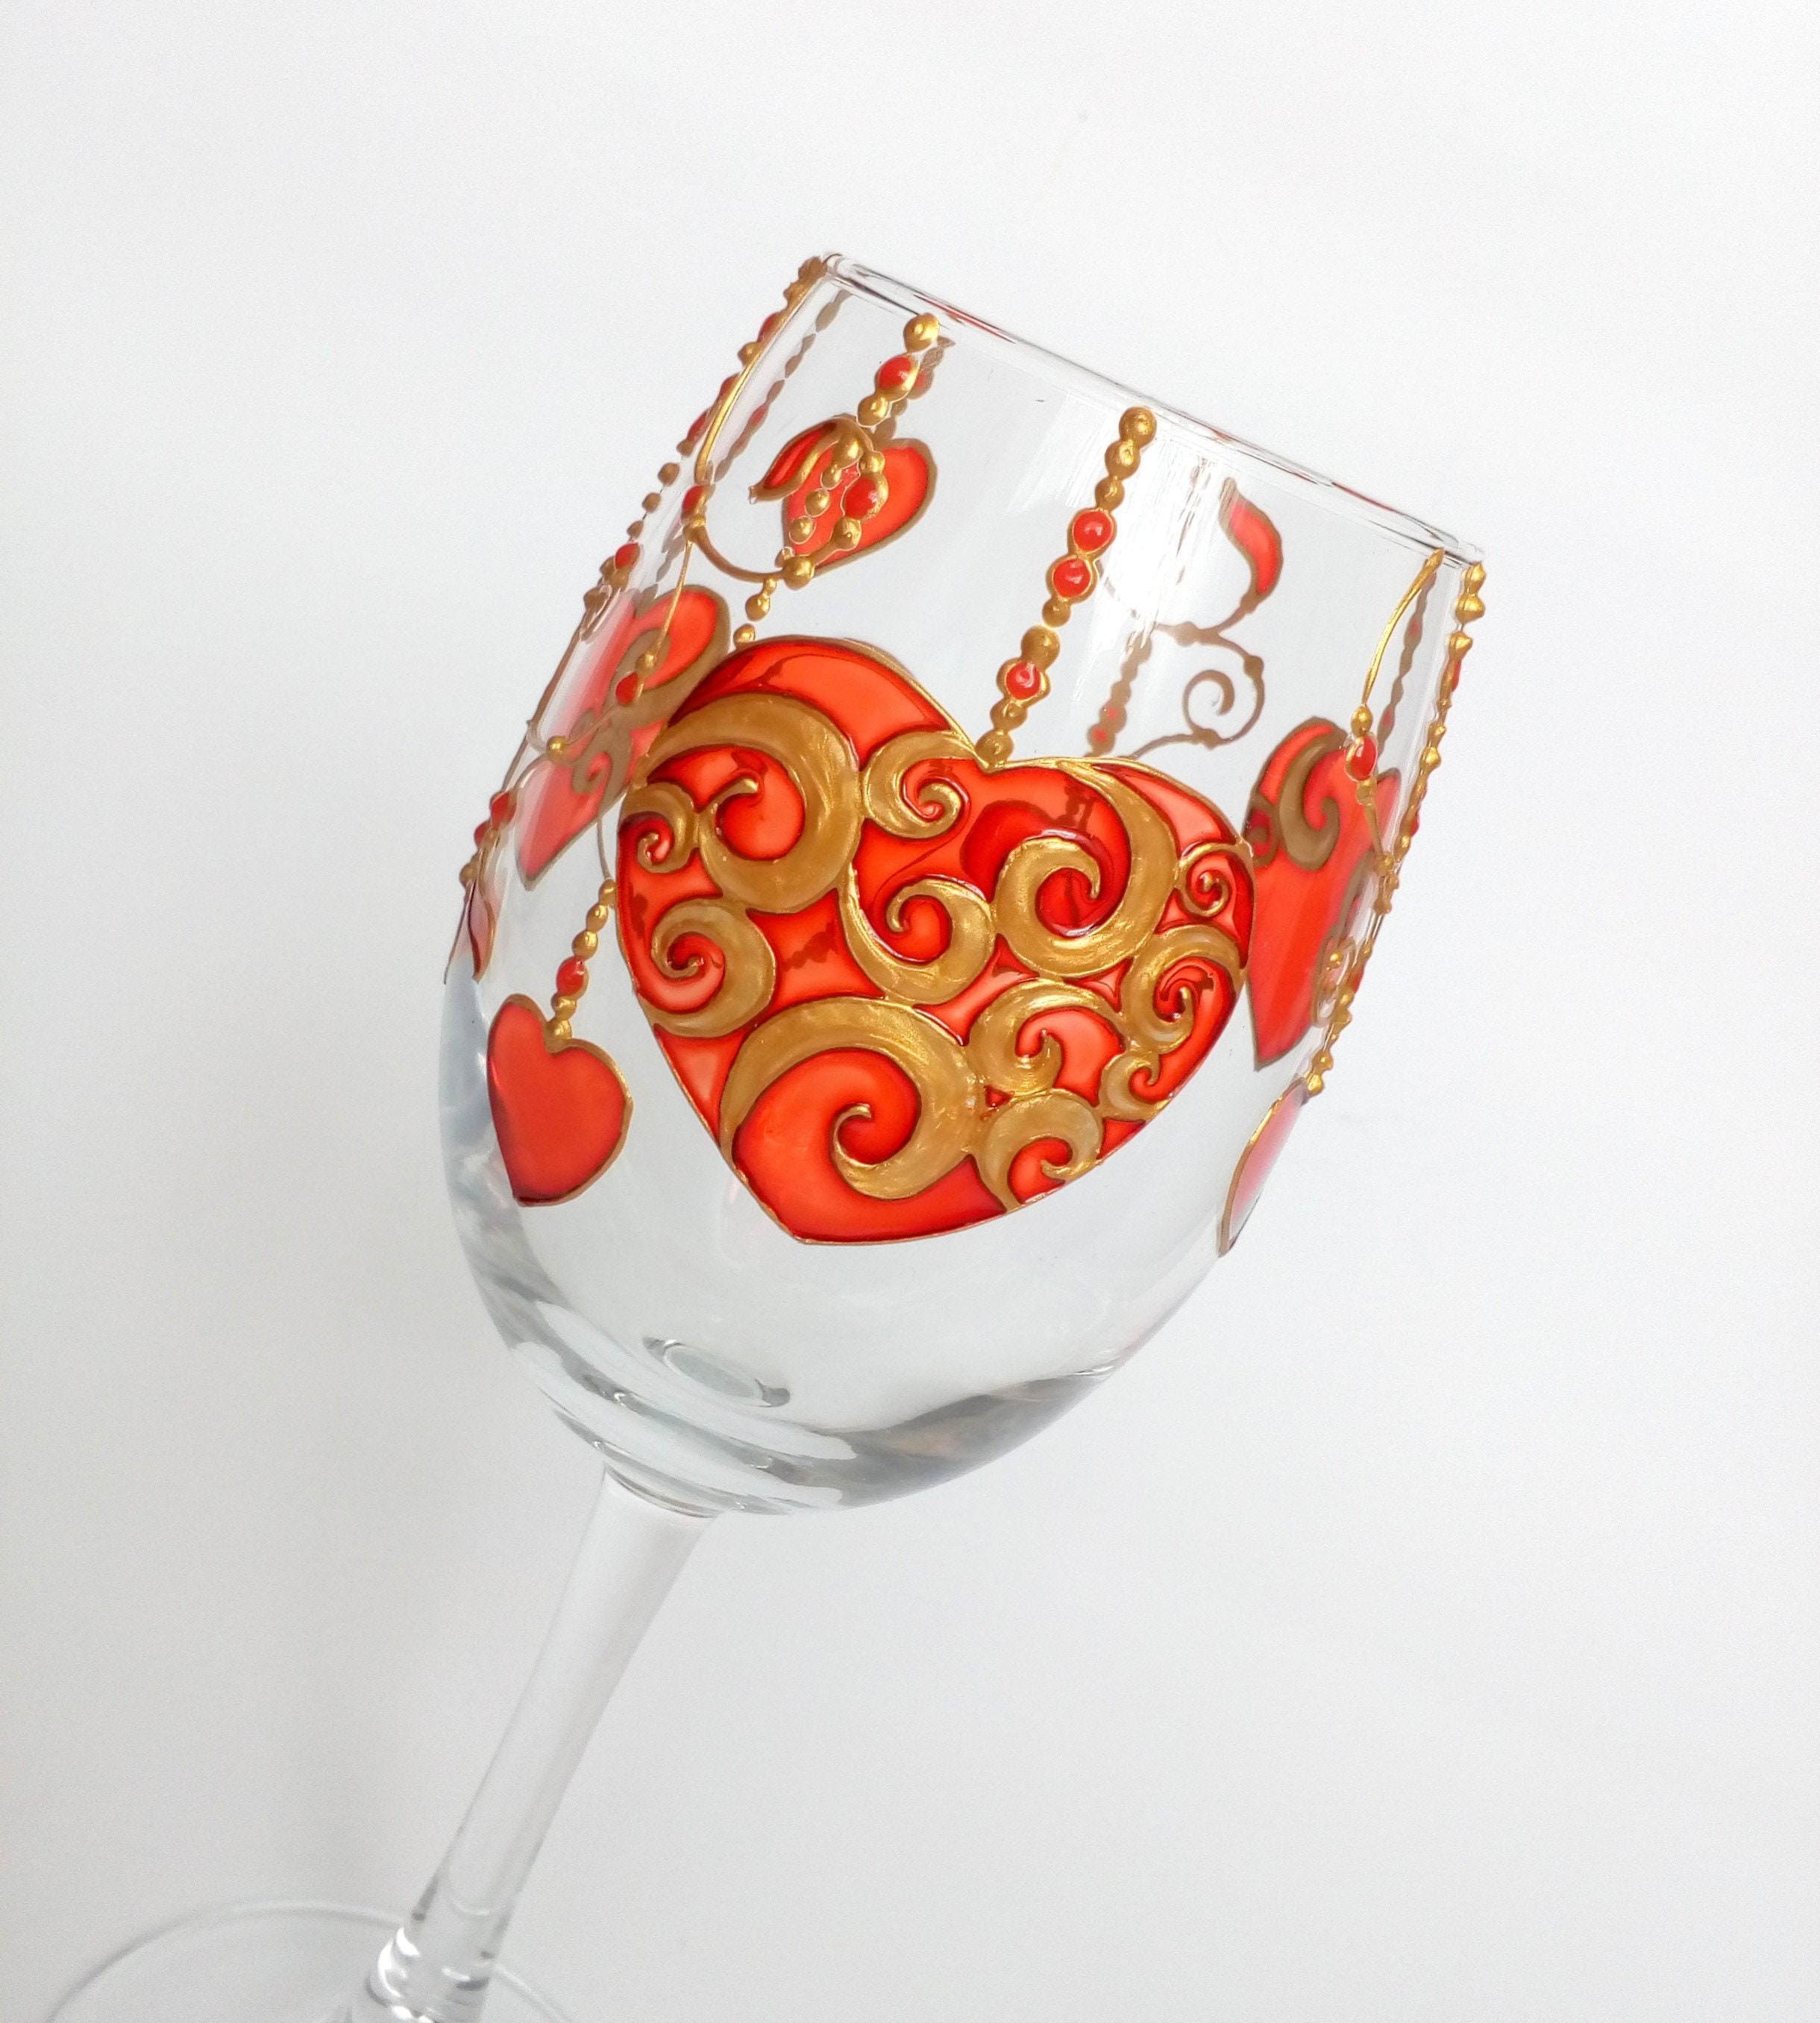 VALENTINE'S WINE GLASSES CUTE GIFTS FOR VALENTINES DAY Poster for Sale by  DreamShop57